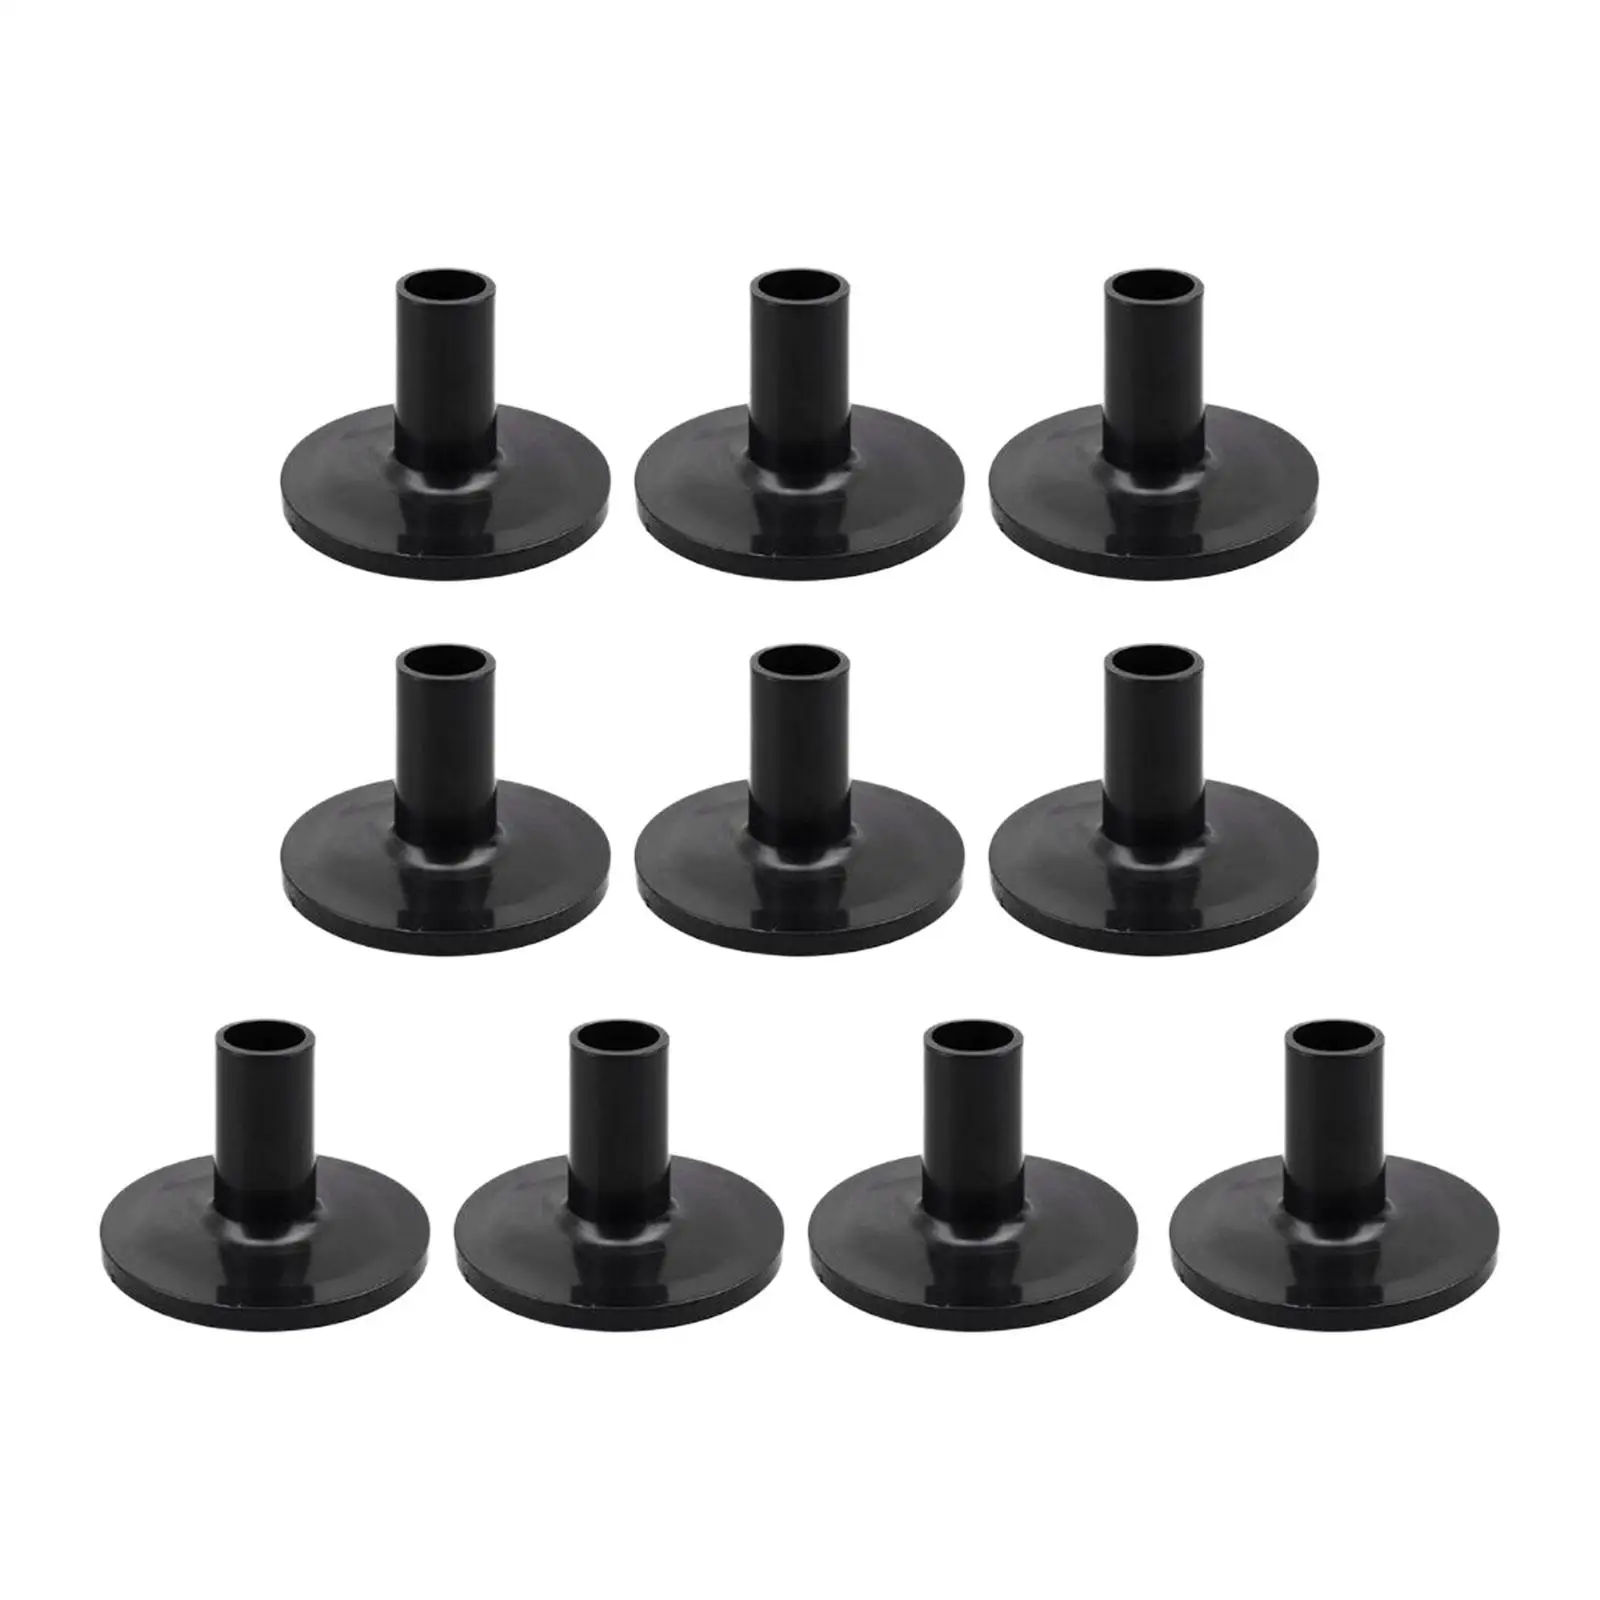 10Pcs Cymbal Sleeves Portable Cymbal Support for Hi Hat Drum Accessories